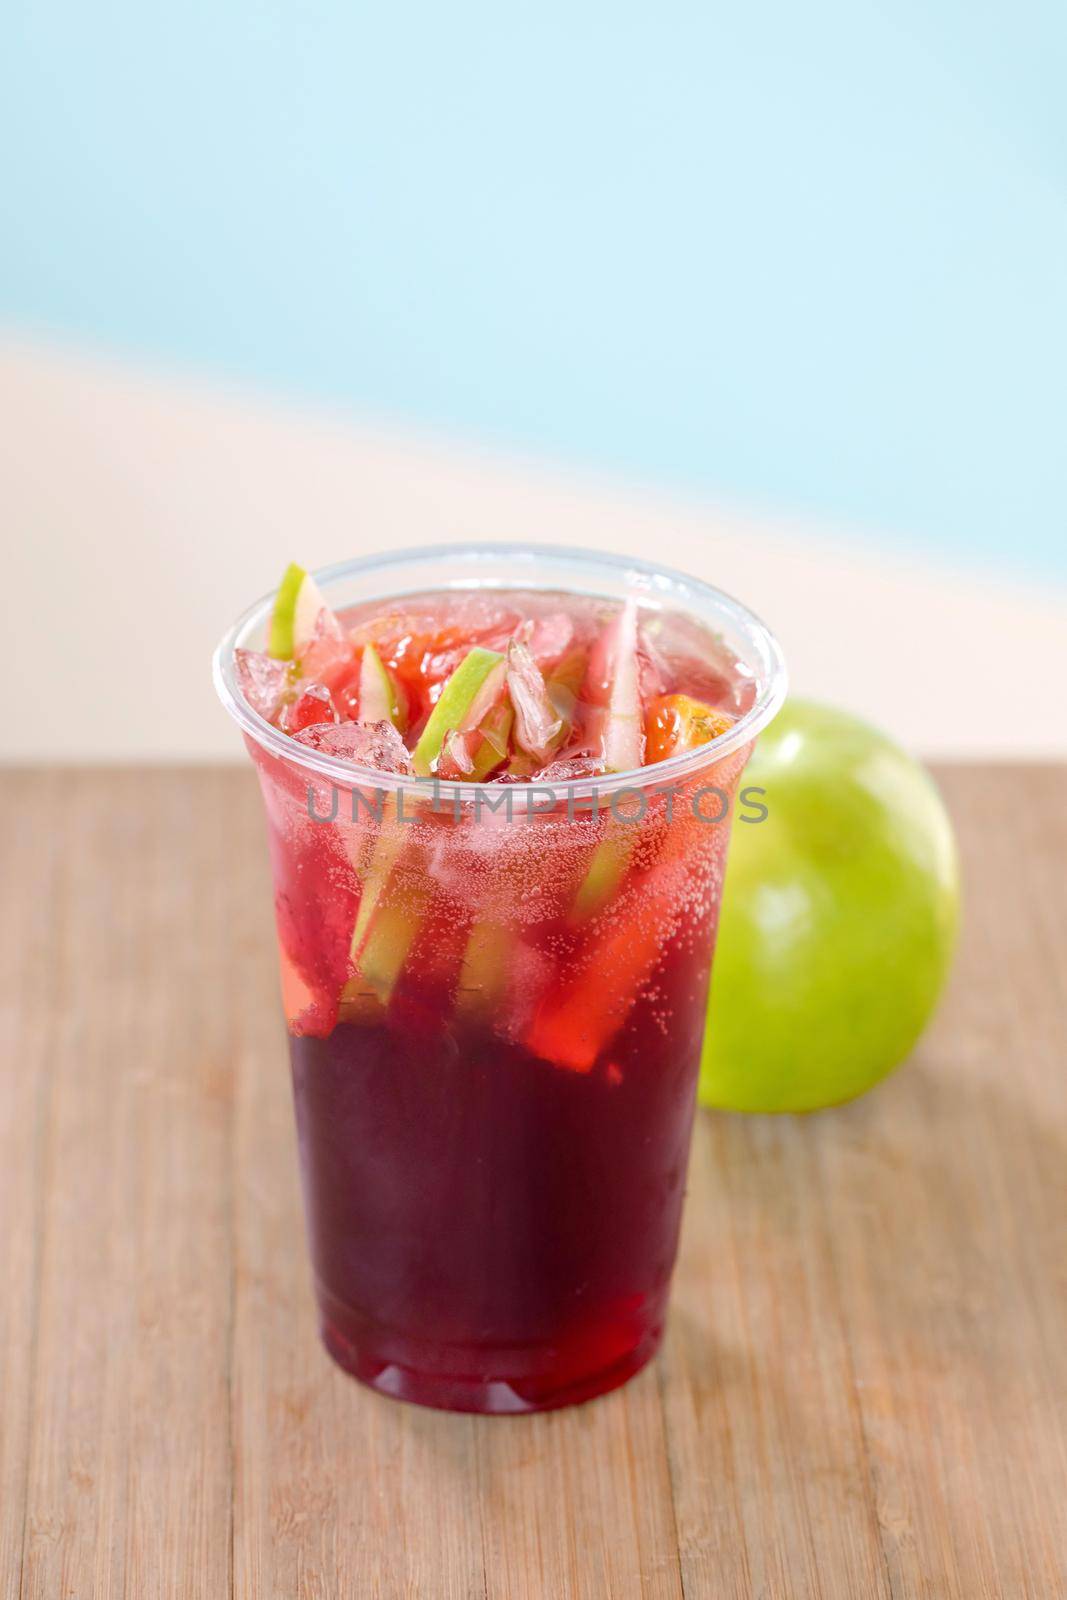 Red sangria beverage with fruits and ice in plastic glass standing on wooden table with green apple